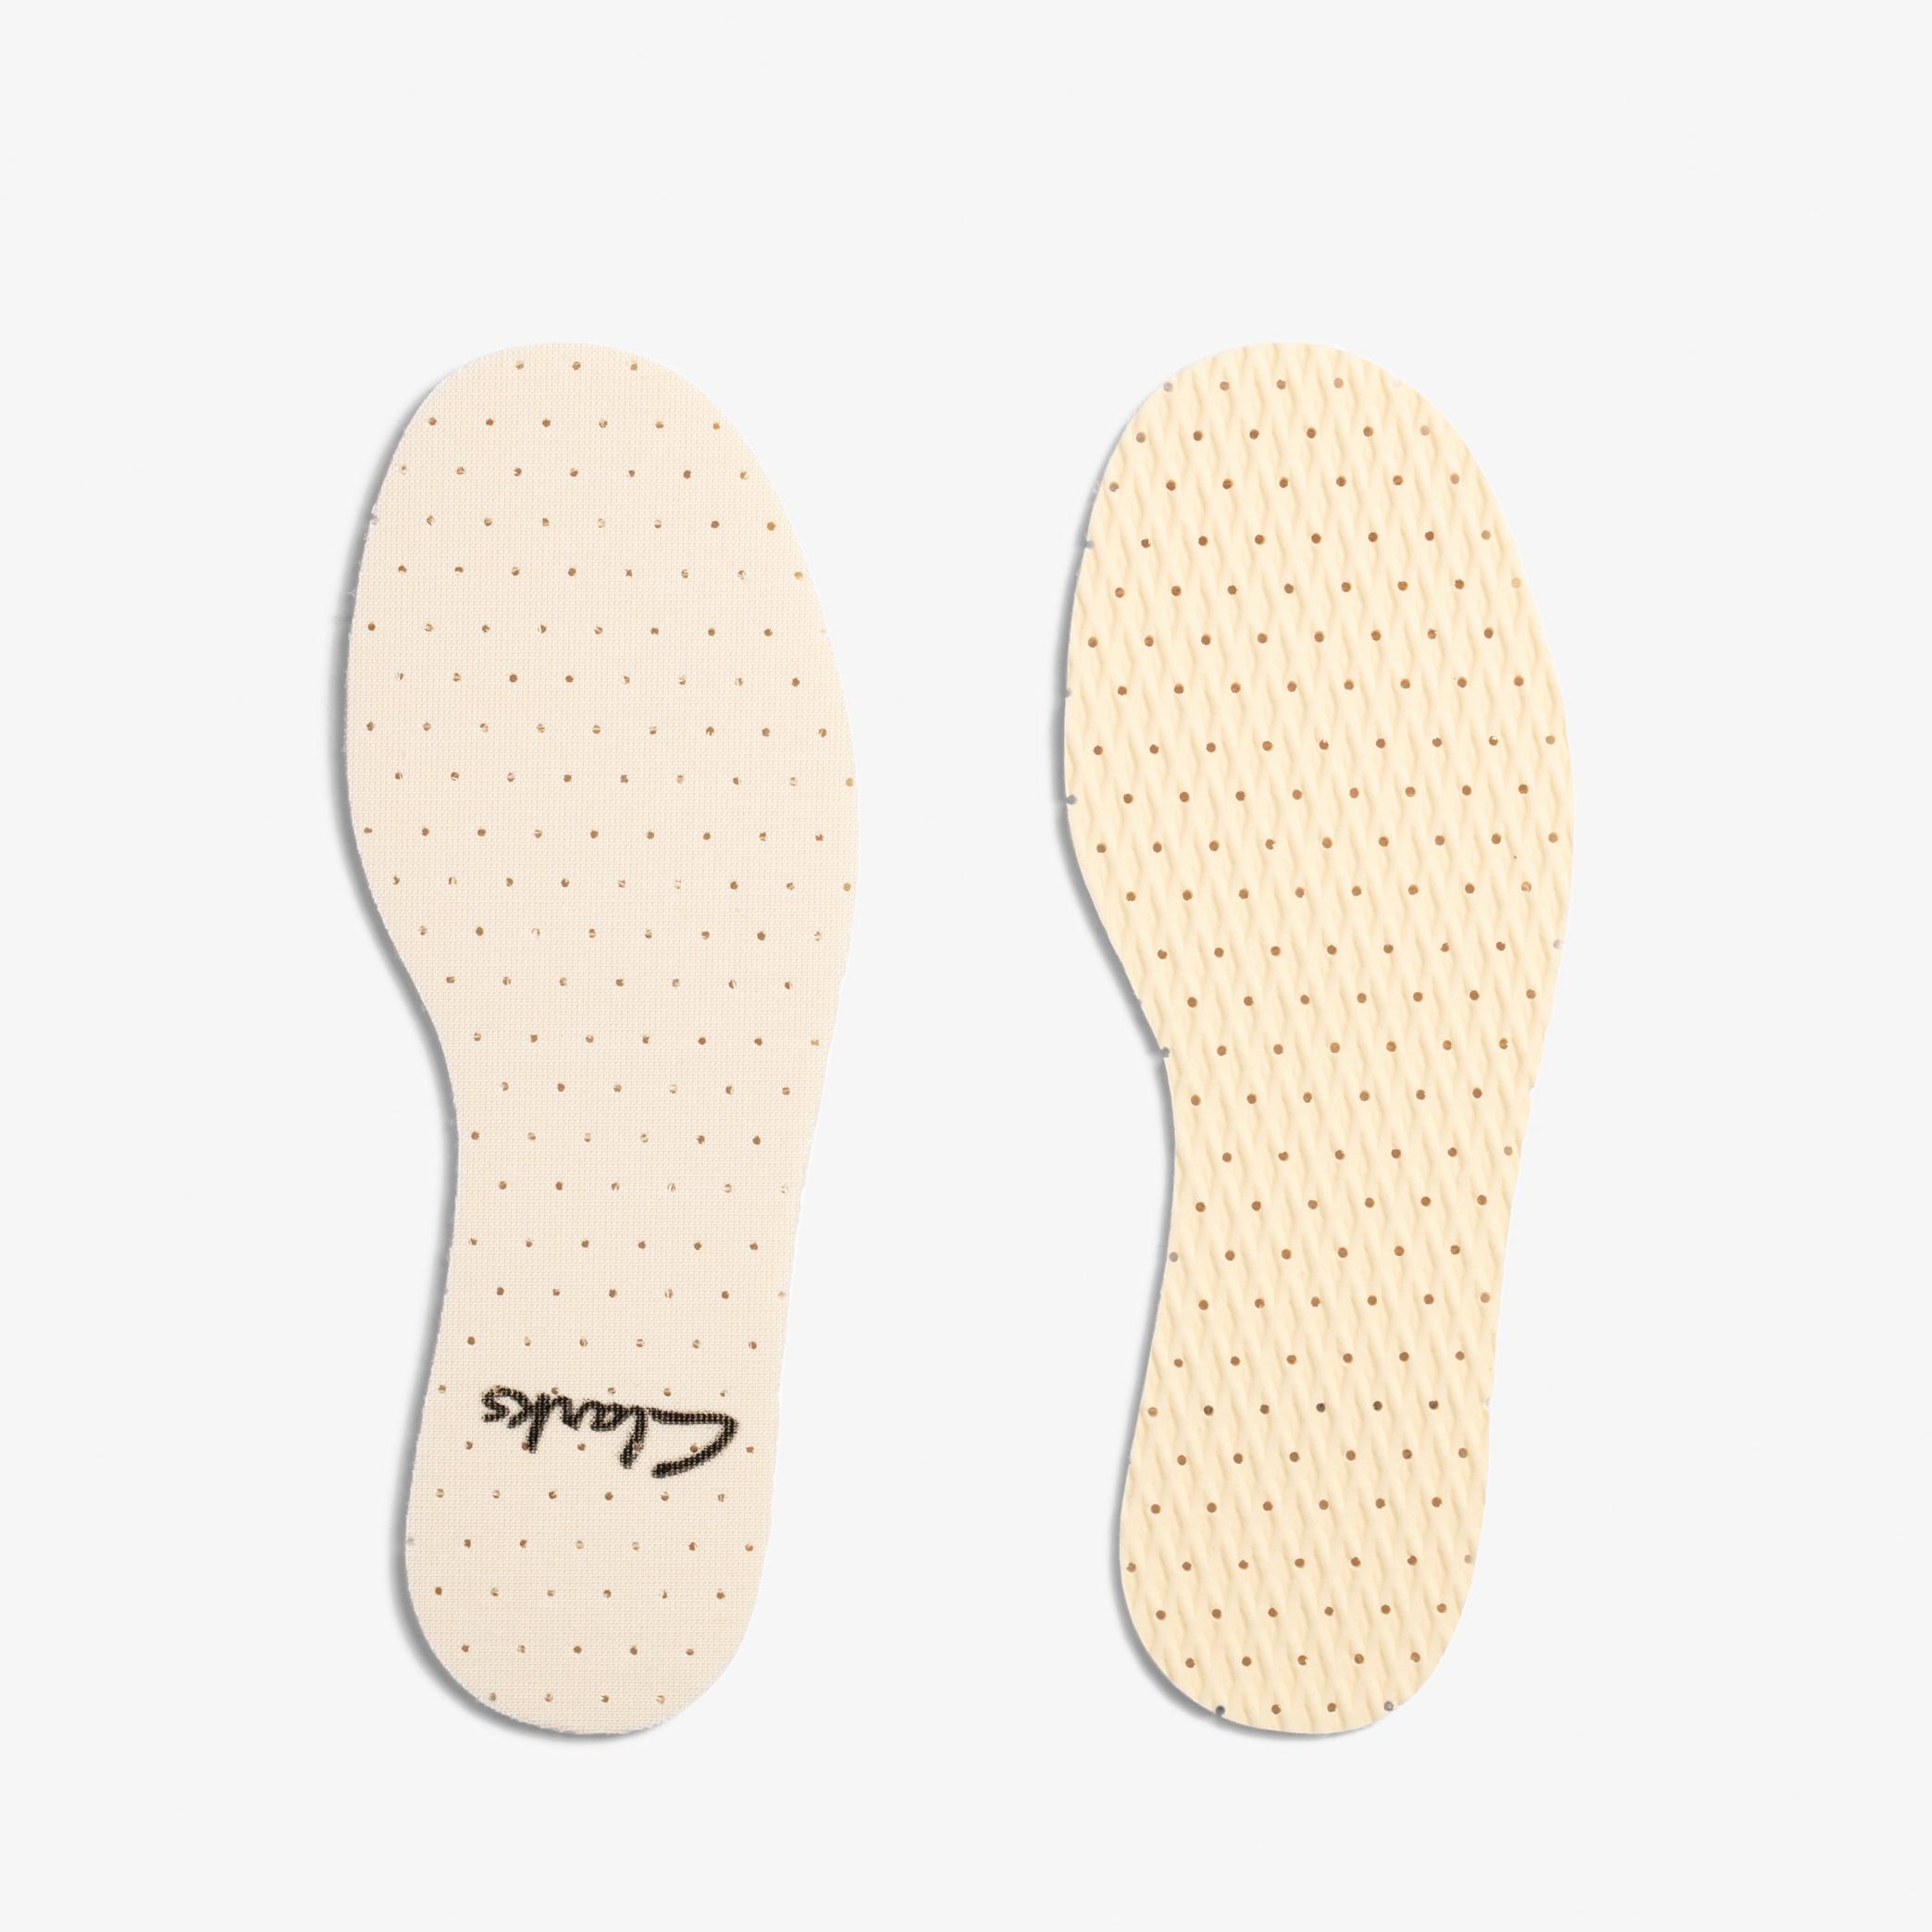 Sz12 Childs Foam Insoles  Insoles, view 2 of 2